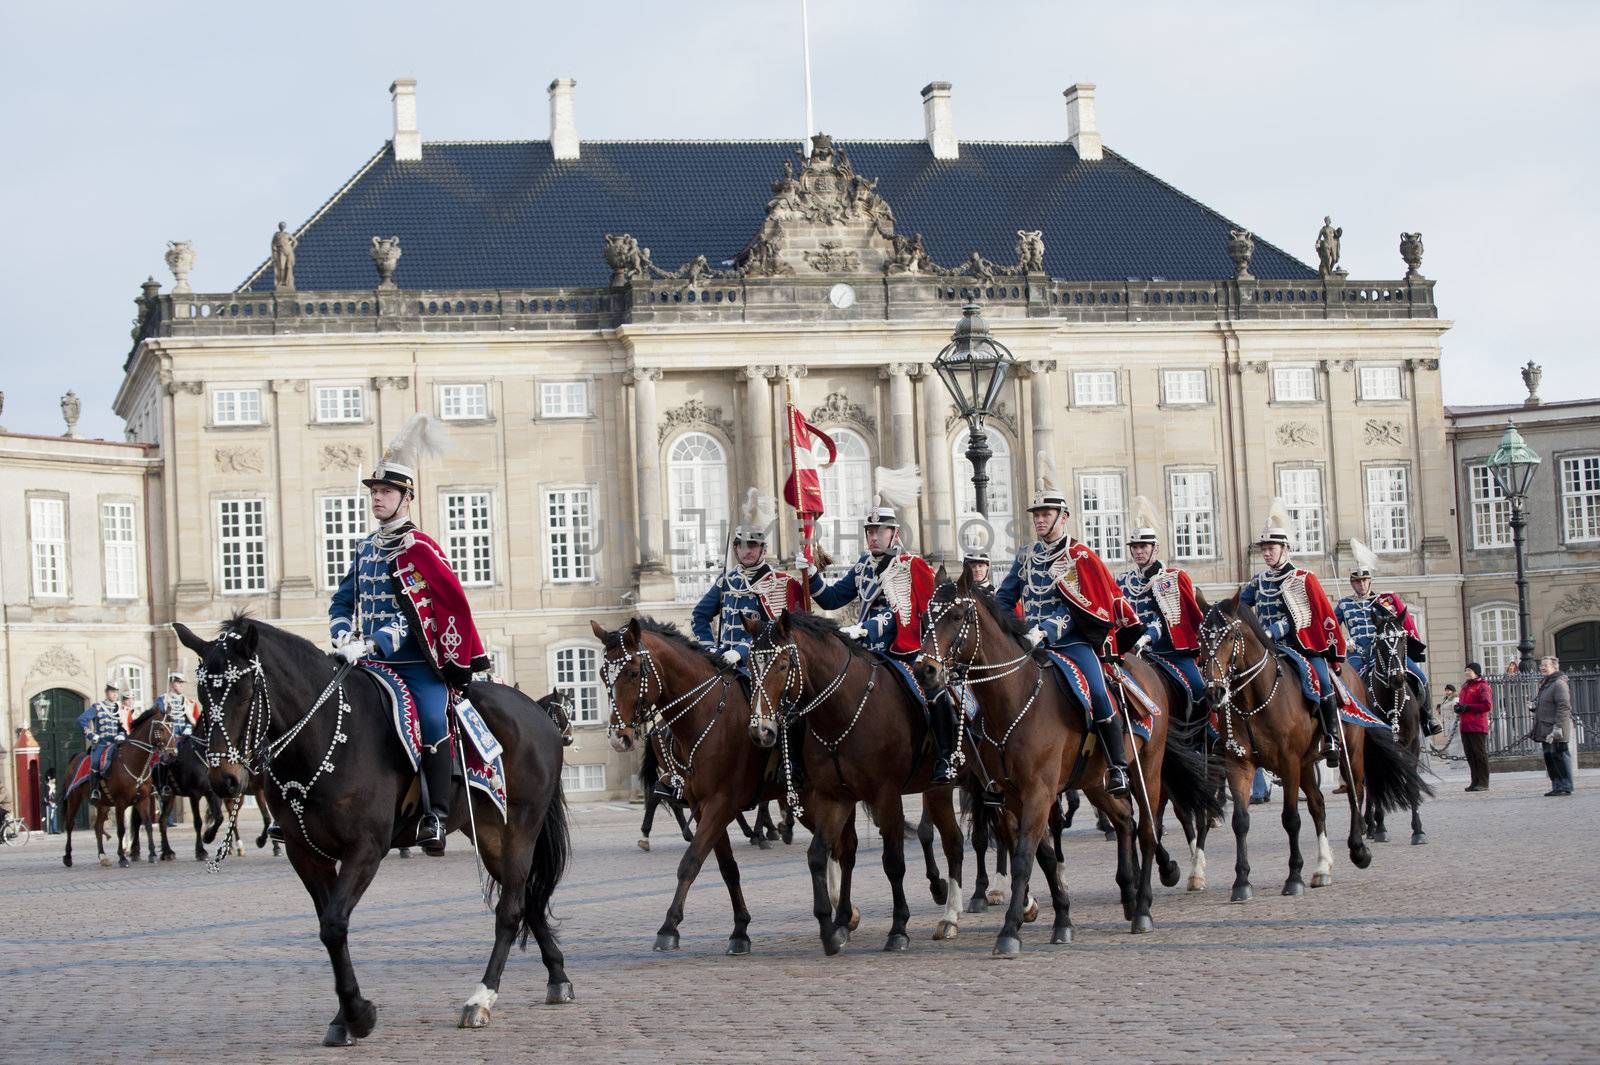 The Royal Danish Guard patrols the royal residence Amalienborg Palace and serves the royal Danish family.  Amalienborg is also known for the Danish Royal Guard, who patrol the palace grounds. The Danish Royal Guard march from Rosenborg Castle at 11.30am daily through the streets of Copenhagen, and execute the changing of the guard in front of Amalienborg Palace at noon. When the Queen is in residence the guard is accompanied by the Royal Guards music band. 